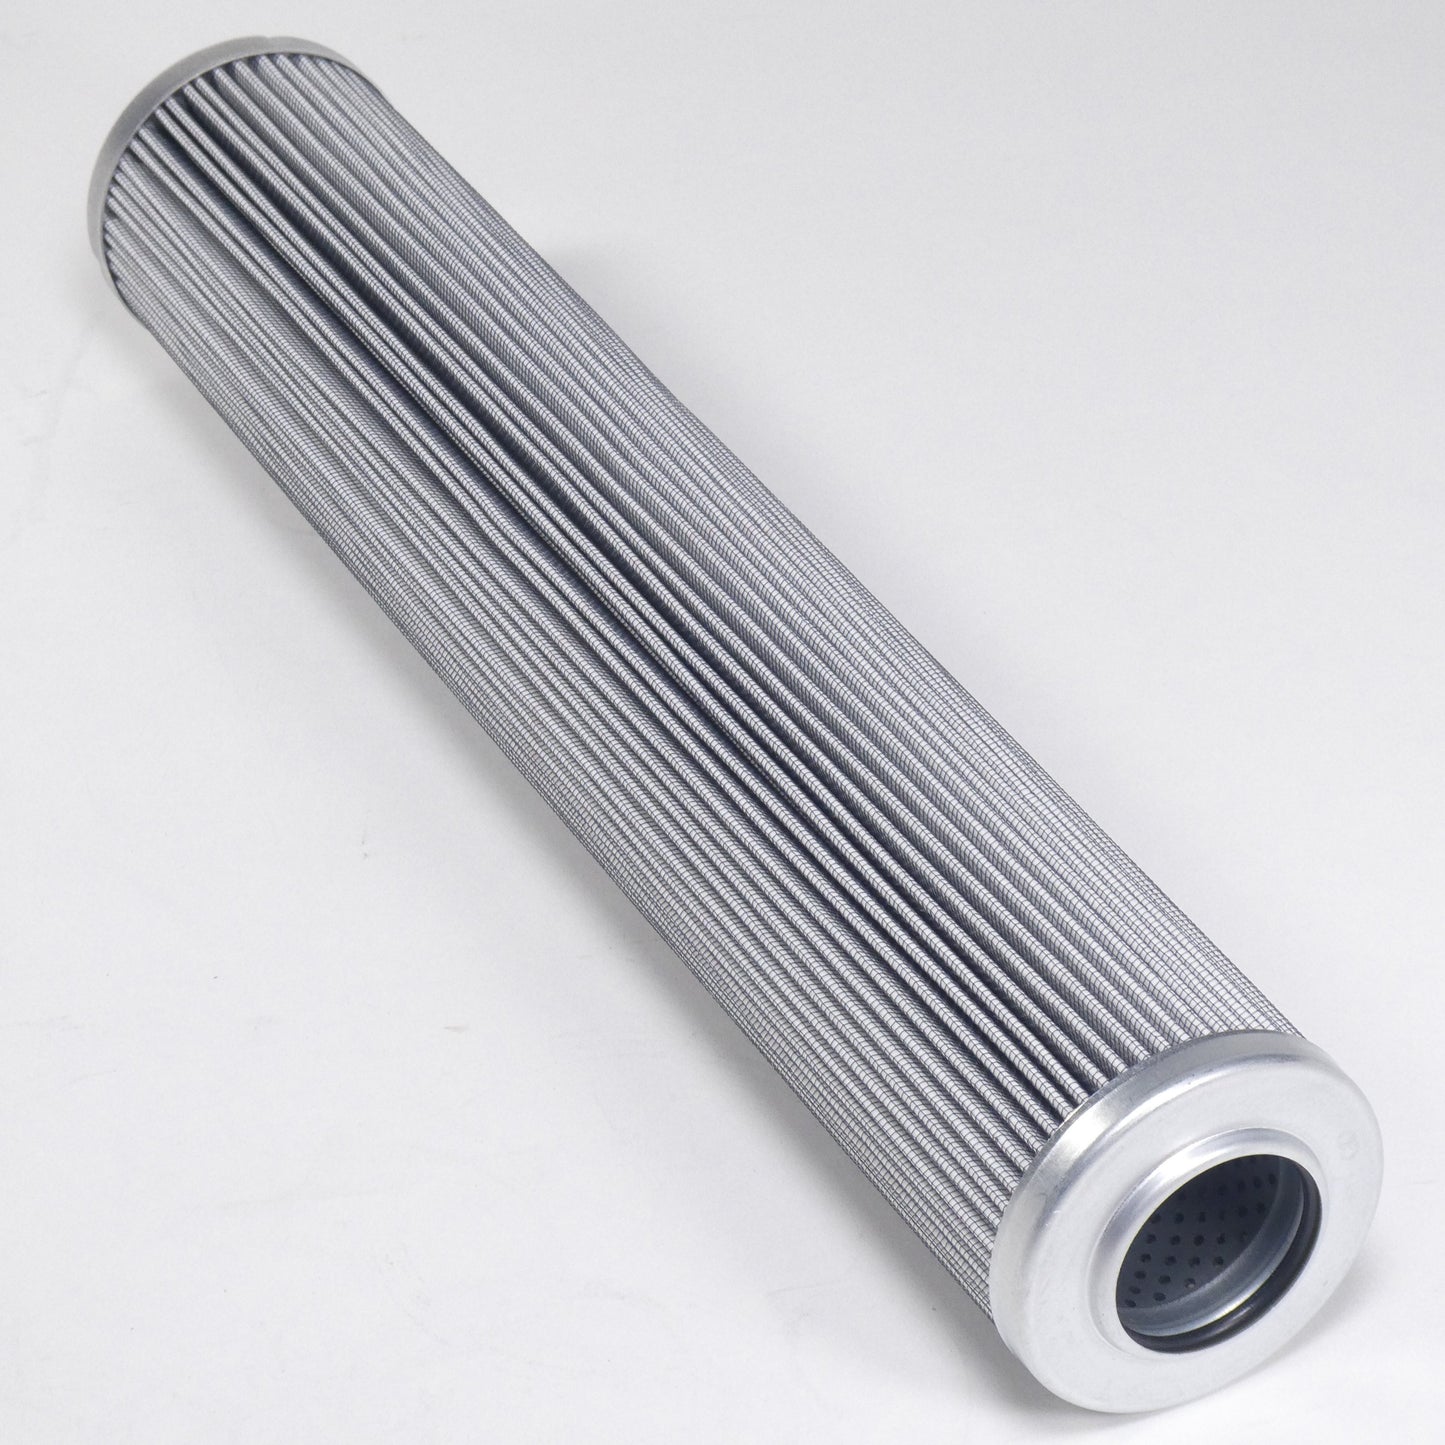 Hydrafil Replacement Filter Element for Baldwin H8085